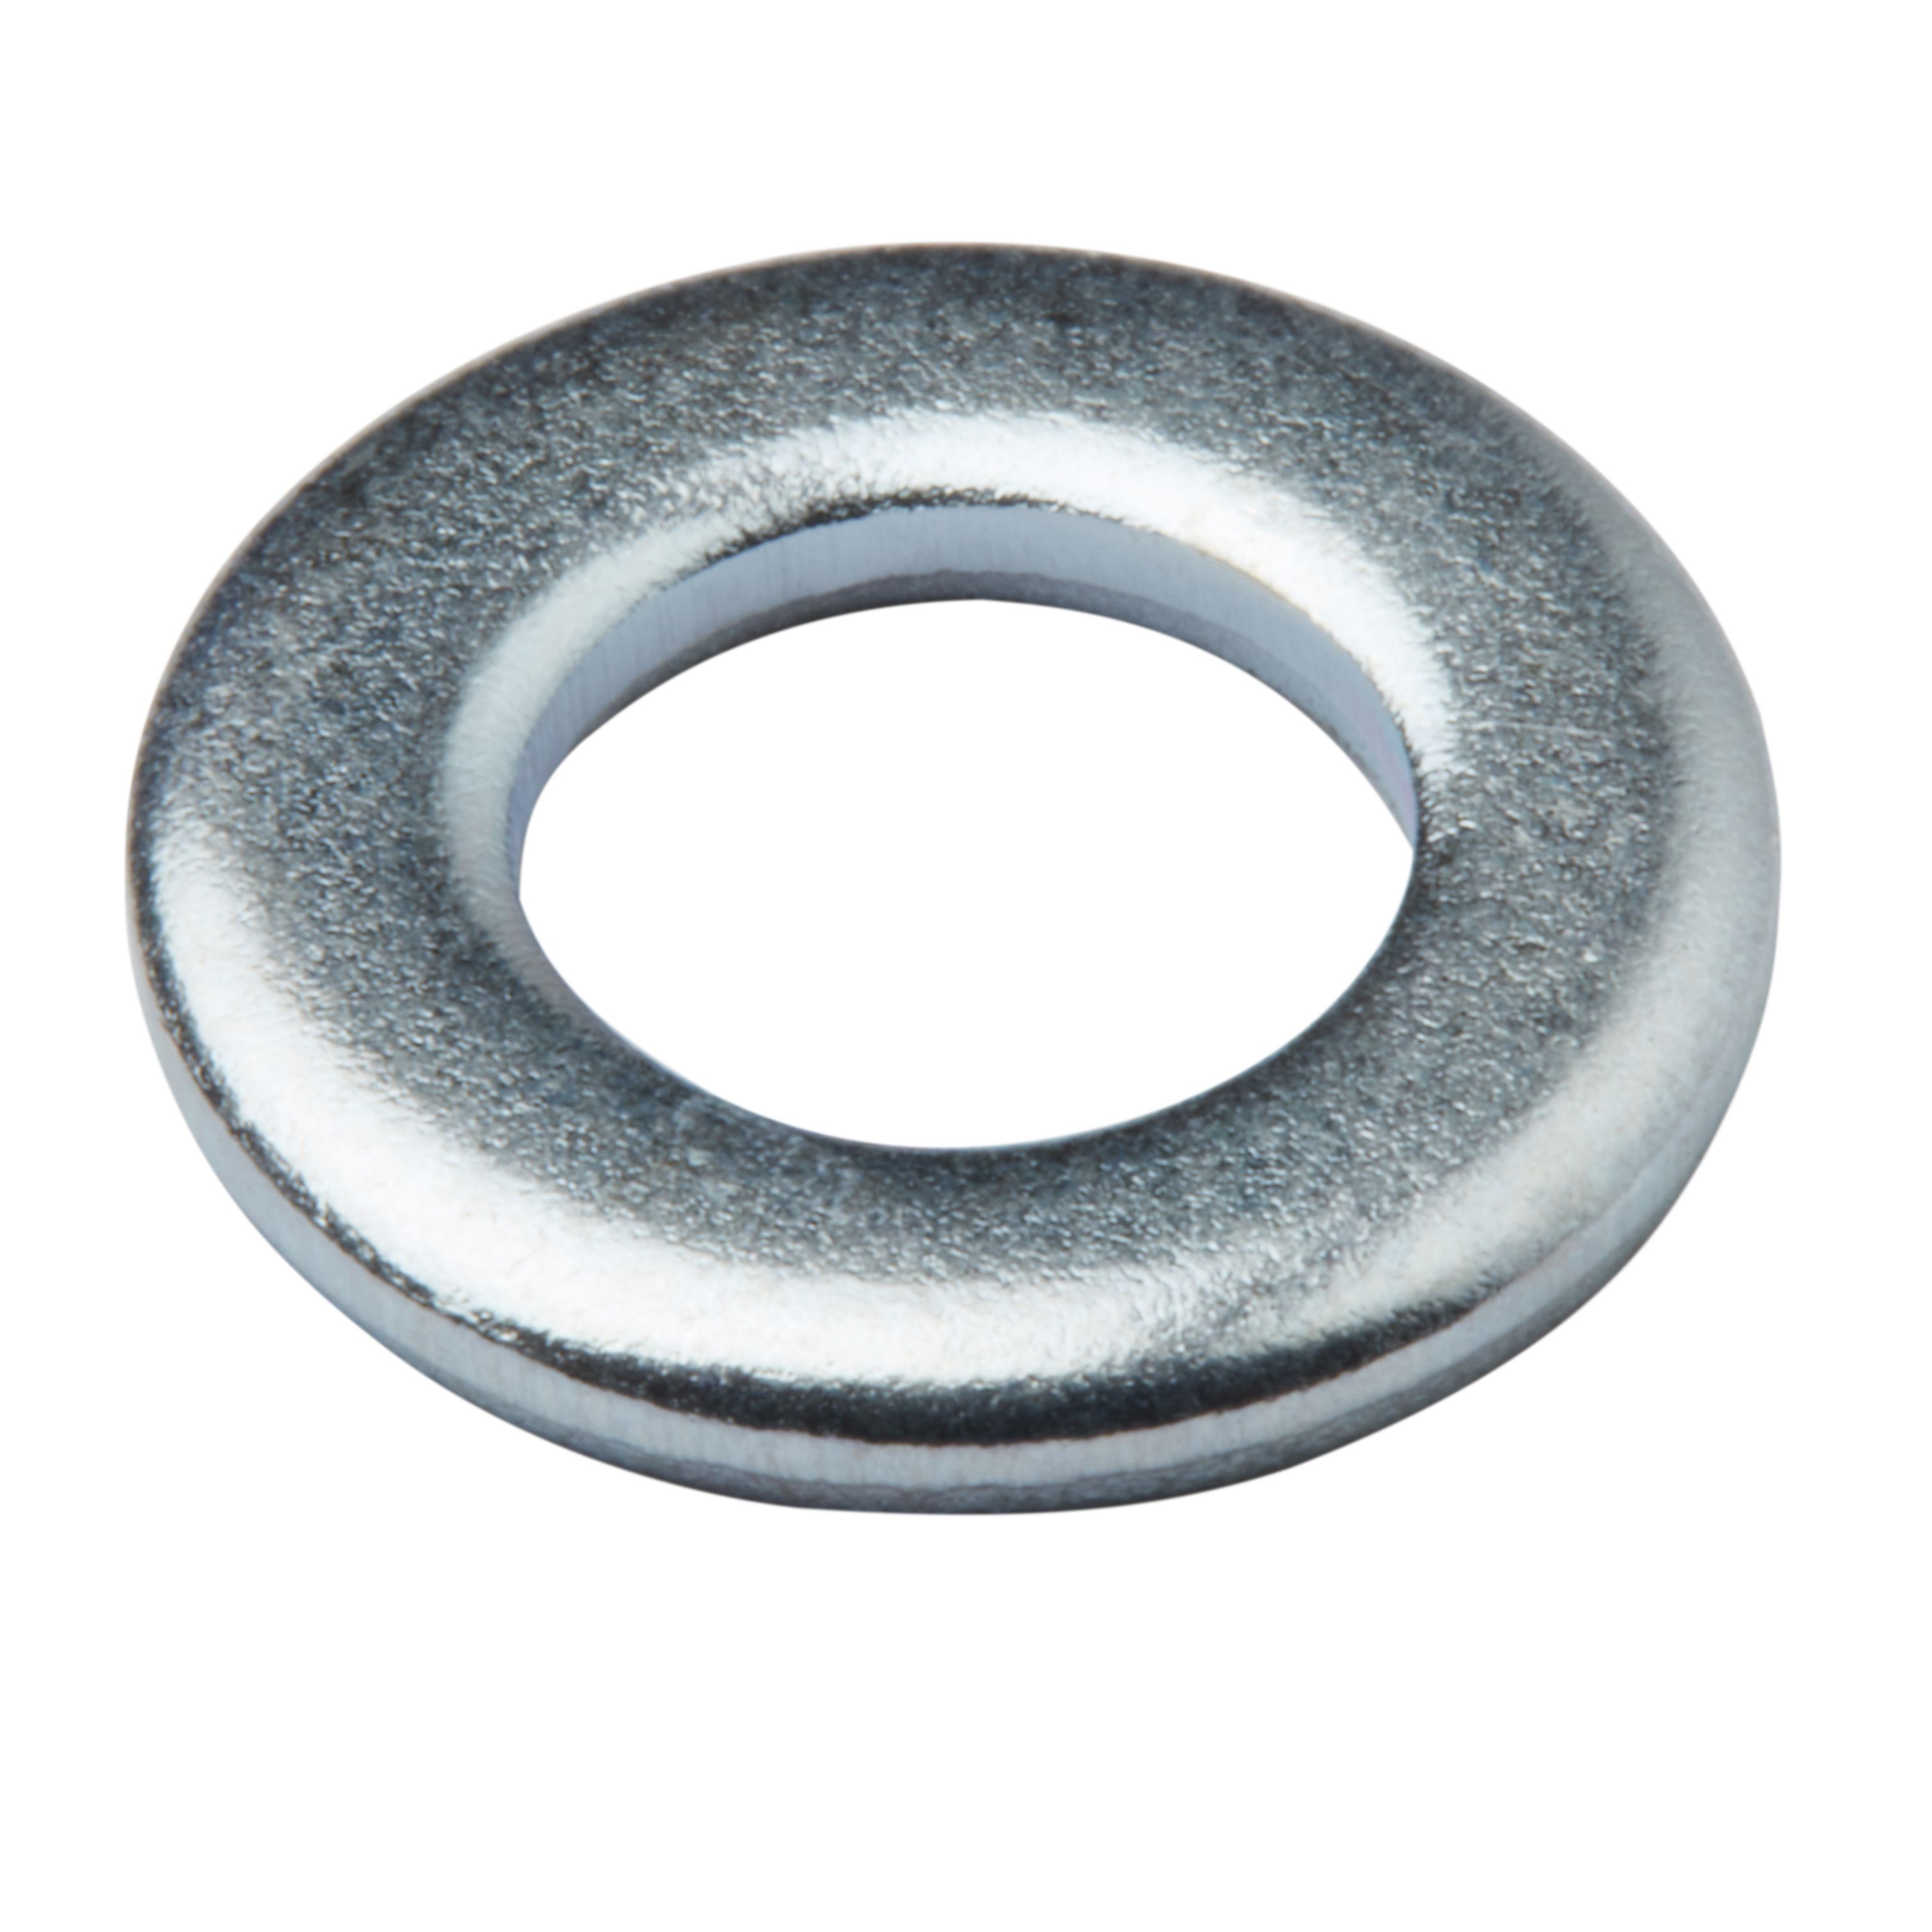 Diall M6 Carbon steel Medium Flat Washer, (Dia)6mm, Pack of 20